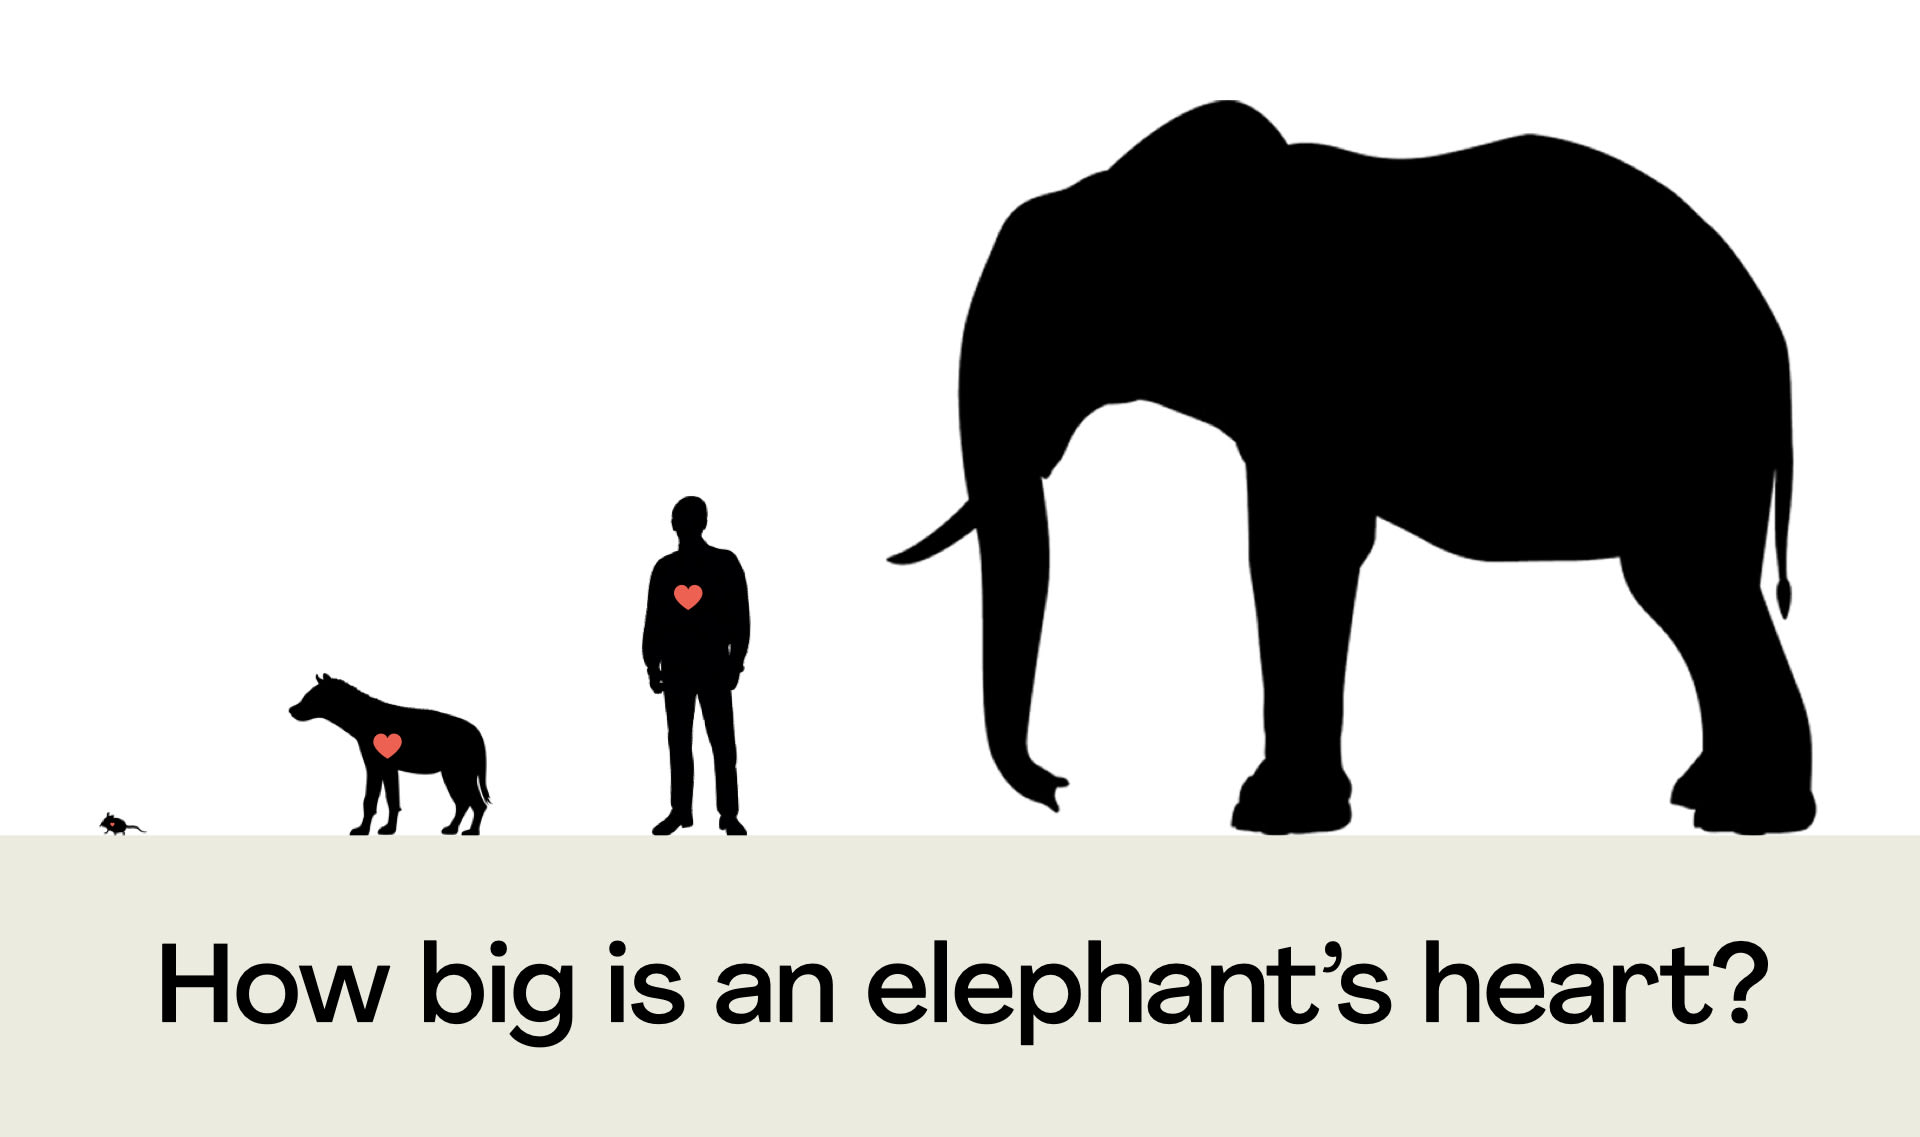 Which animal has the biggest heart?